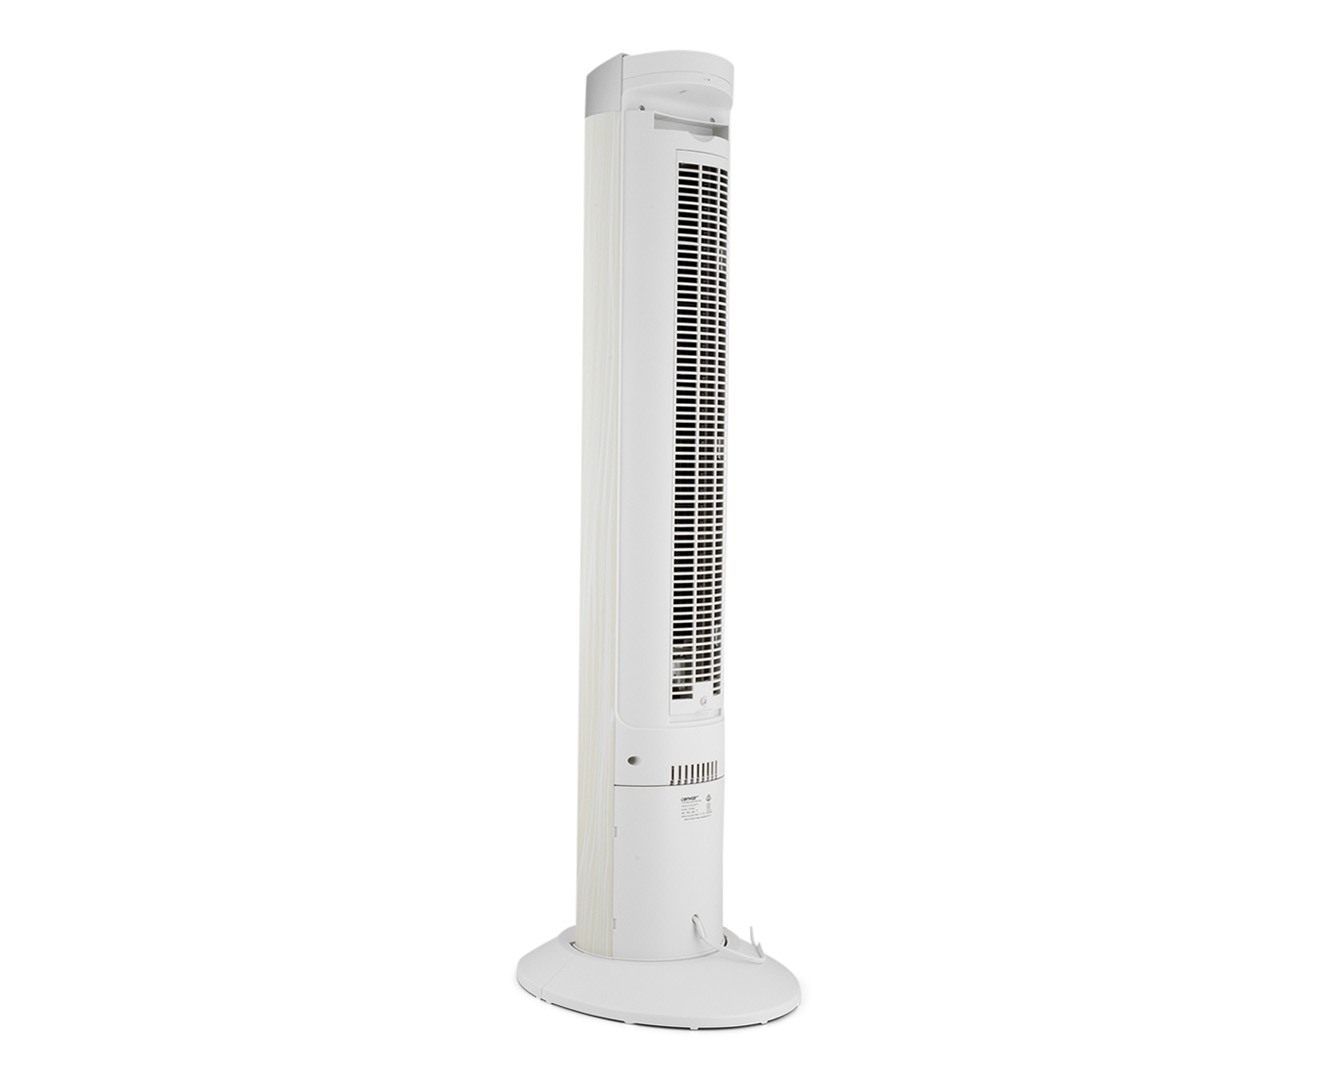 Convair Ctf09w Oscillating Cooltower White pertaining to size 1320 X 1080